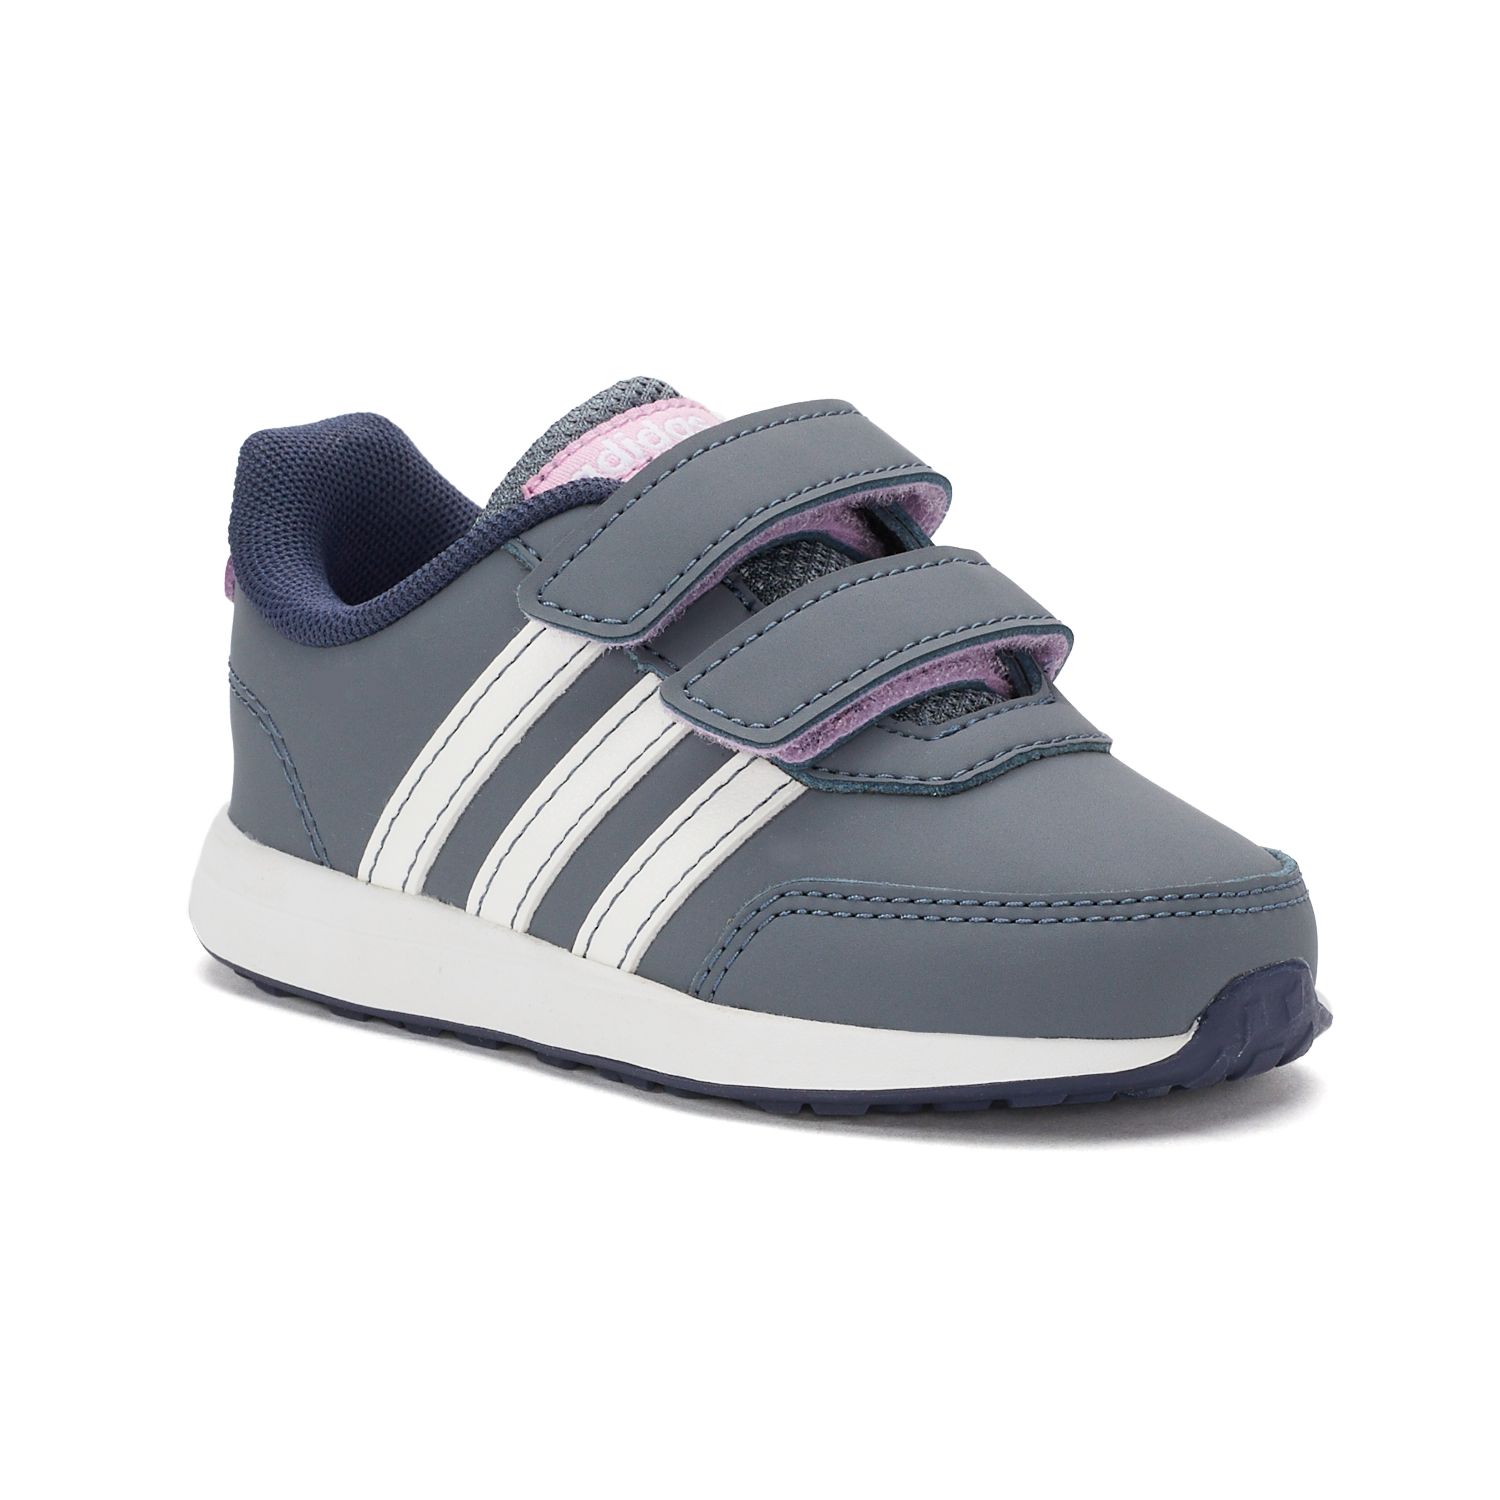 adidas VS Switch 2 Toddler Girls' Sneakers